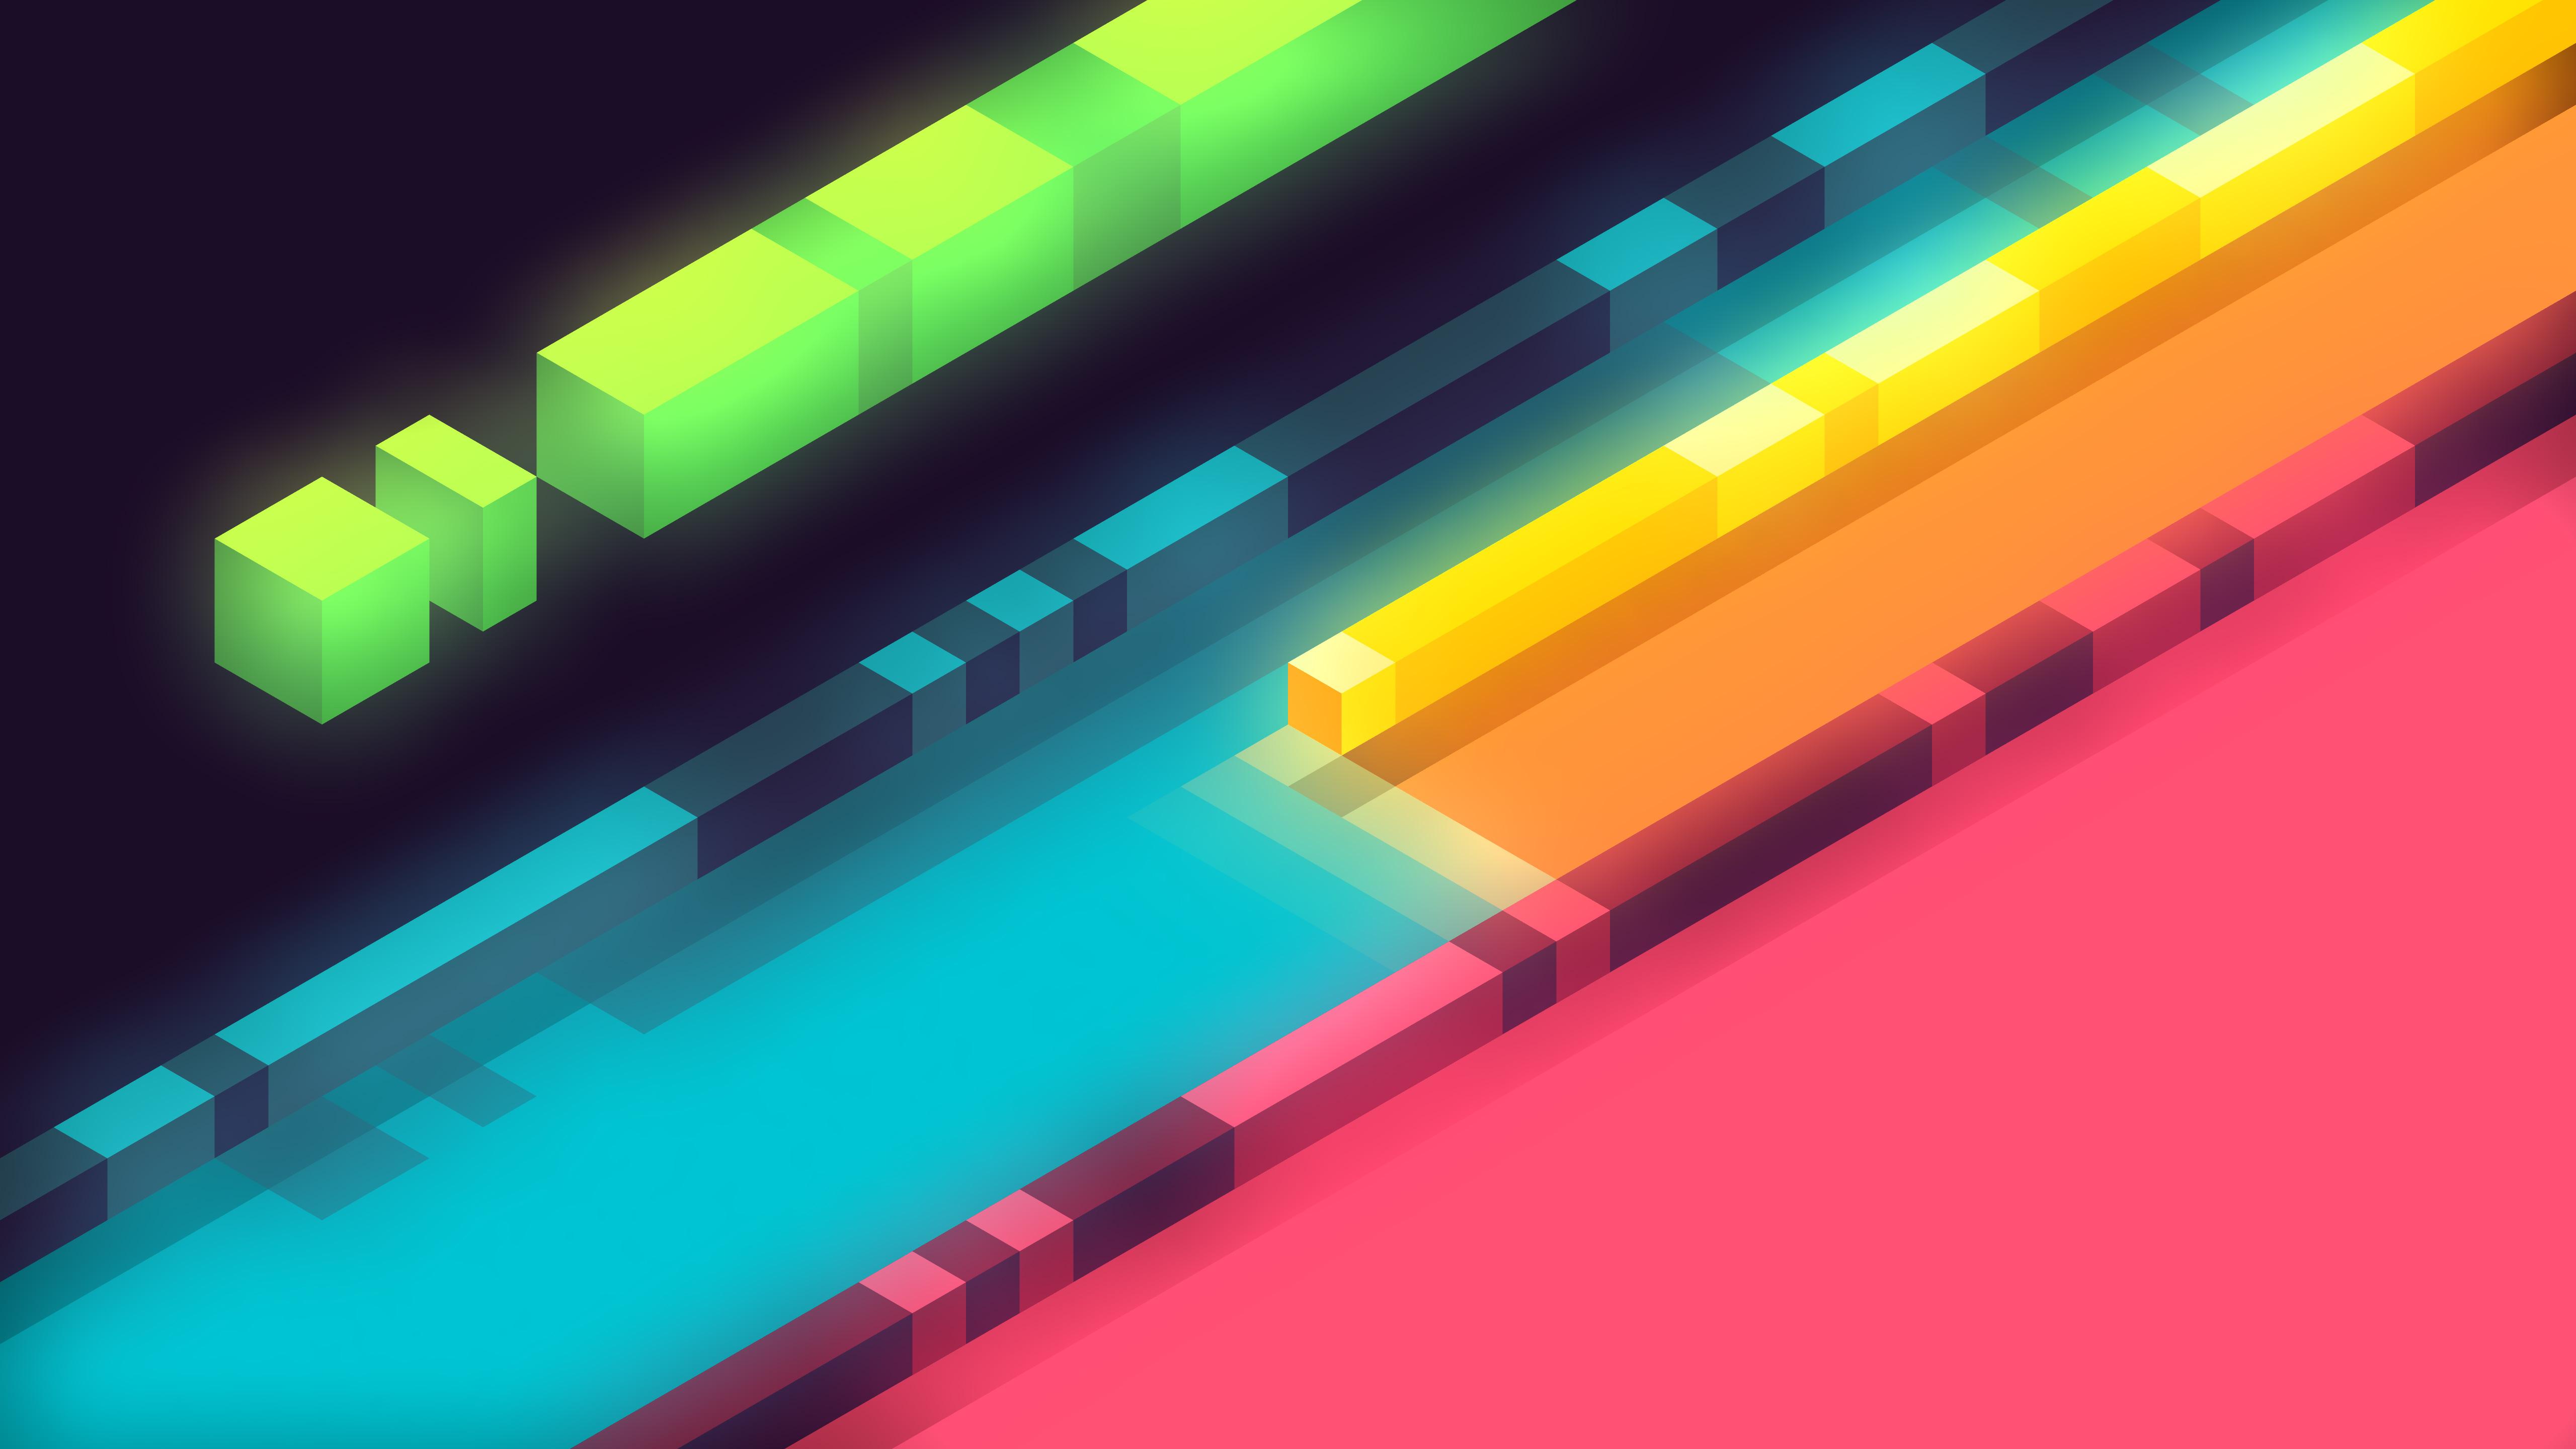 3D Abstract Colorful Shapes Minimalist 5k, HD 3D, 4k